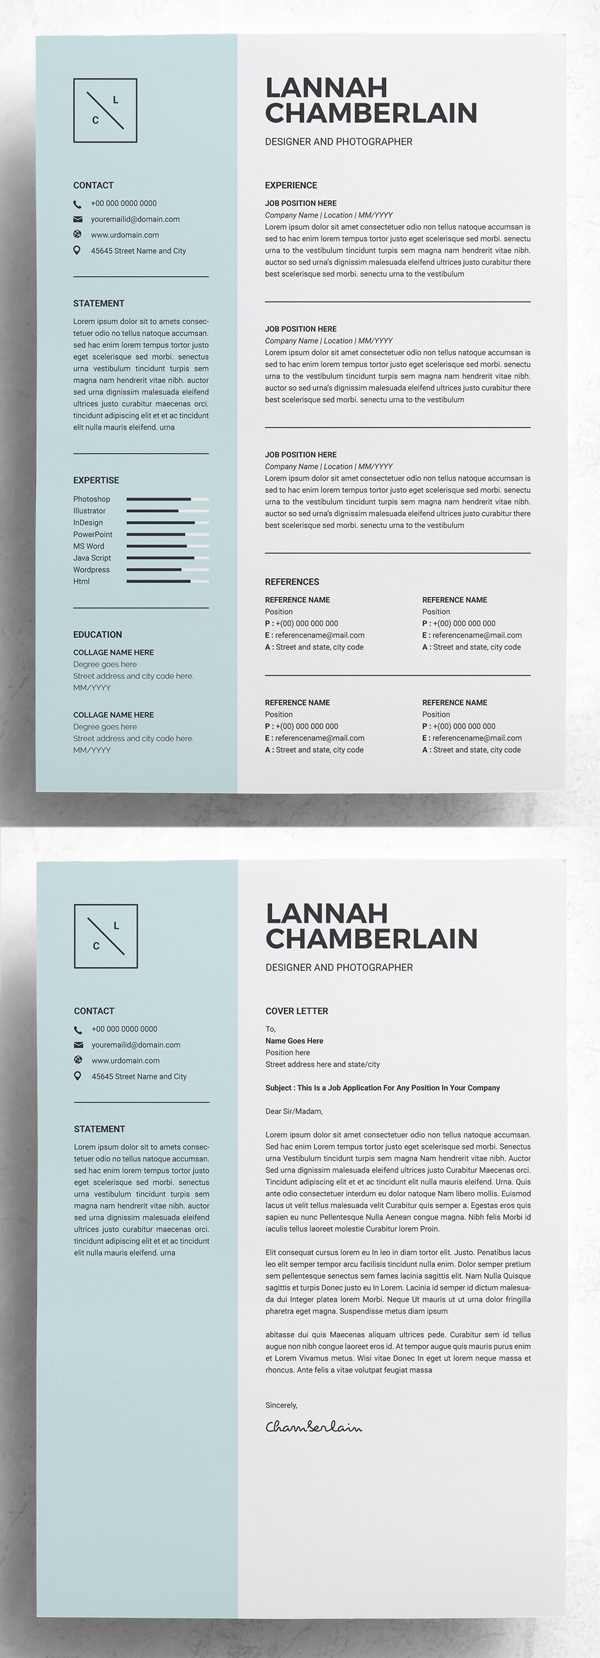 50 Most Popular Resume Templates Of 2022 - 41